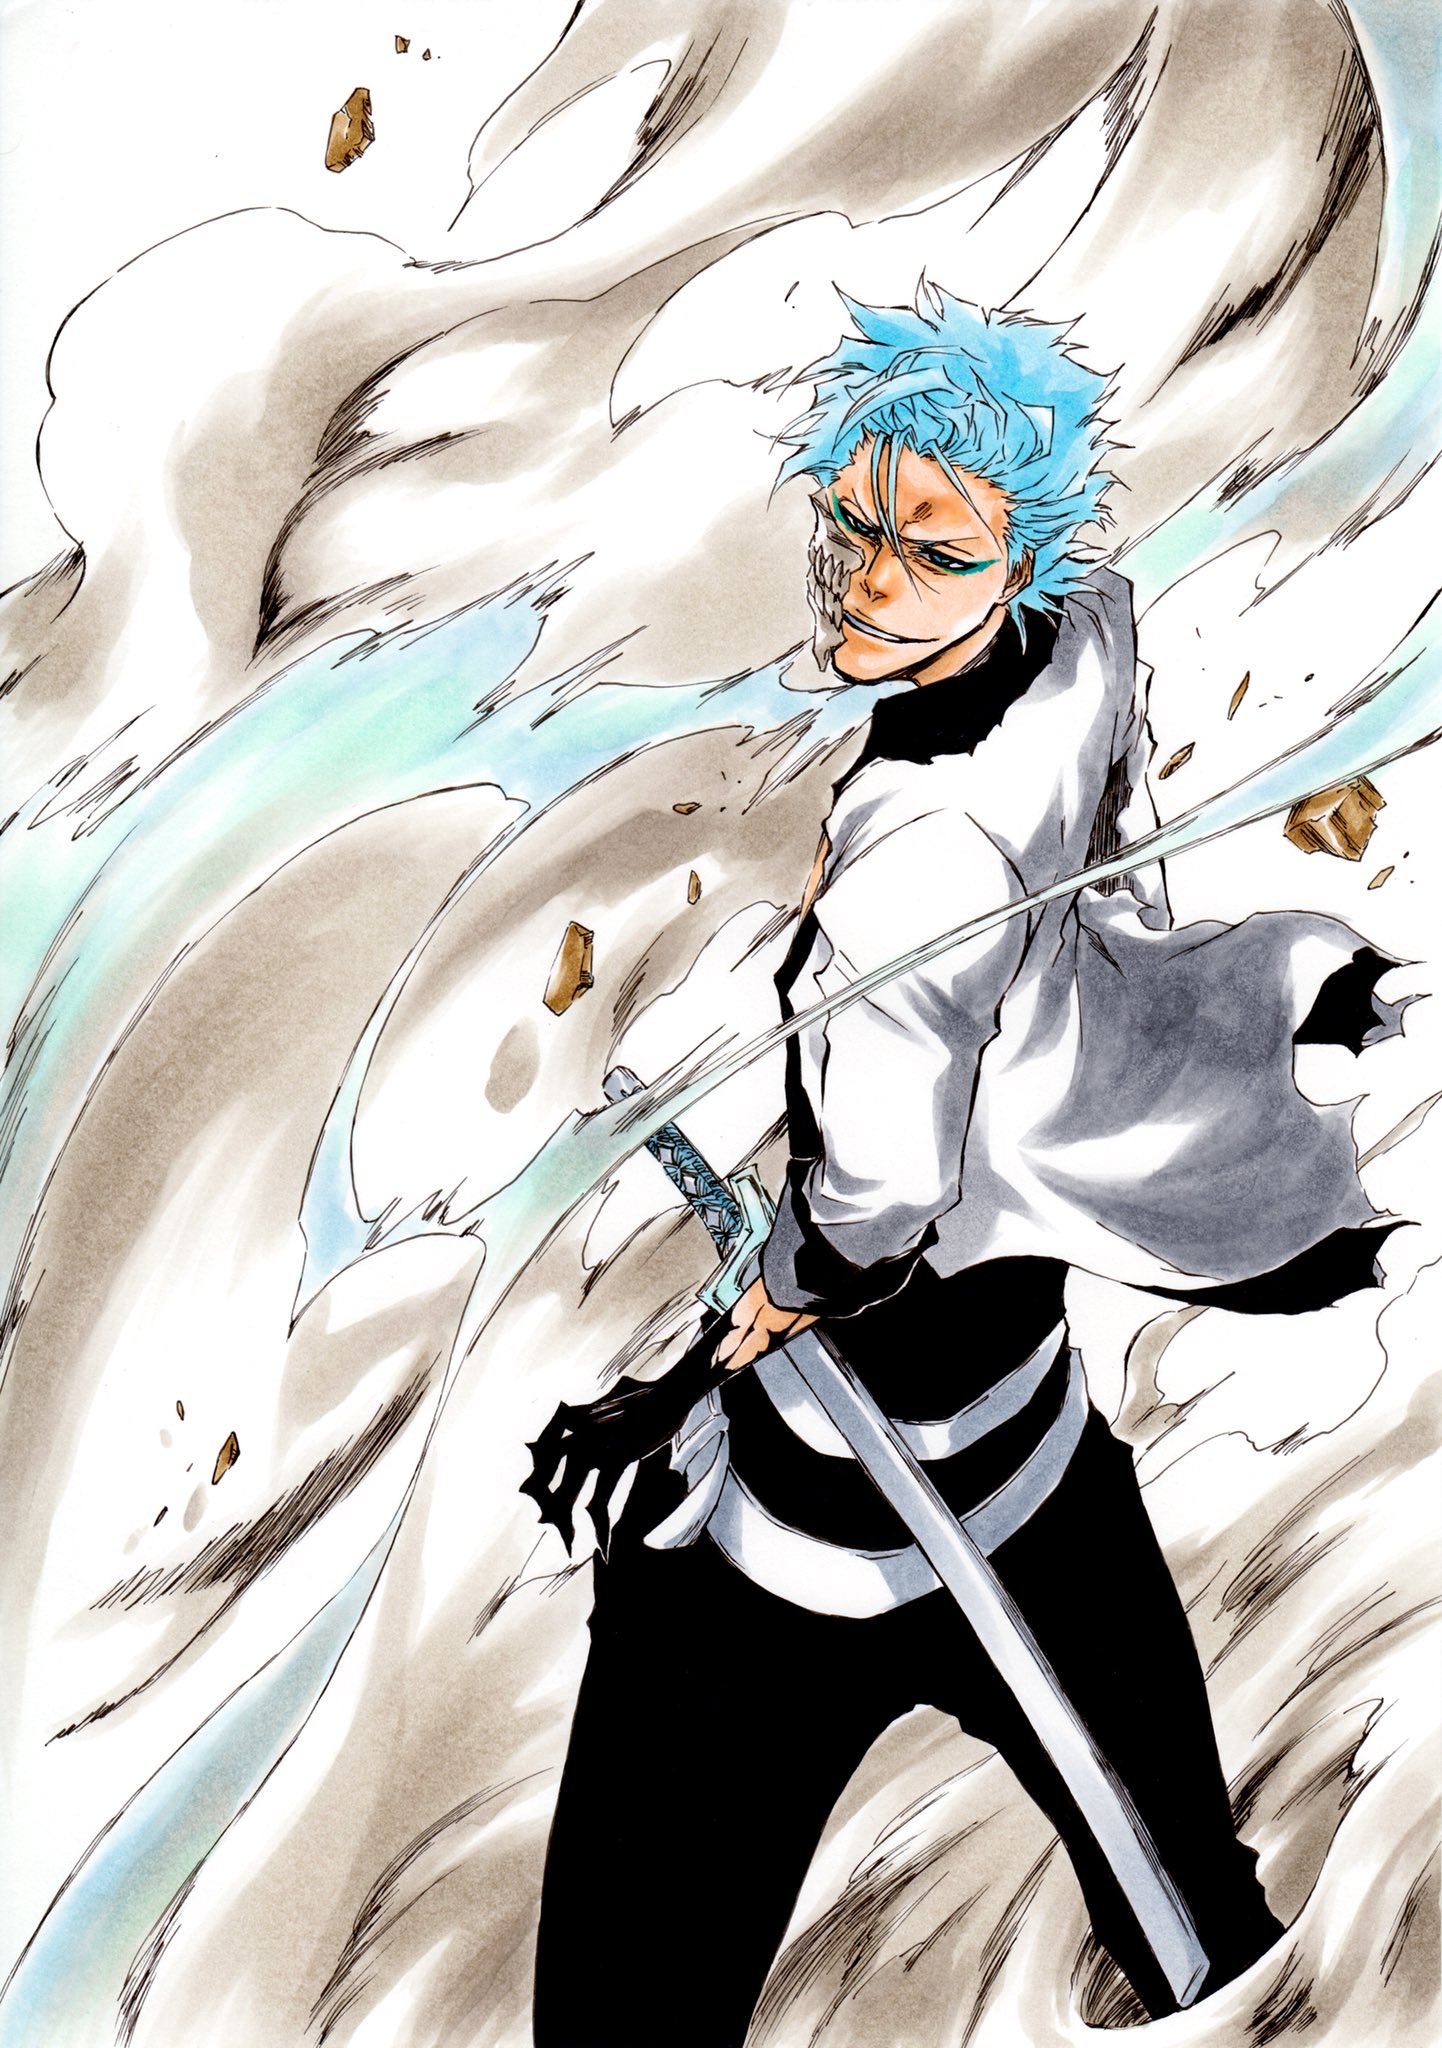 Bleach: TYBW Episode 8 has fans fawning over Grimmjow, Squad Zero, the Soul  Palace, and more